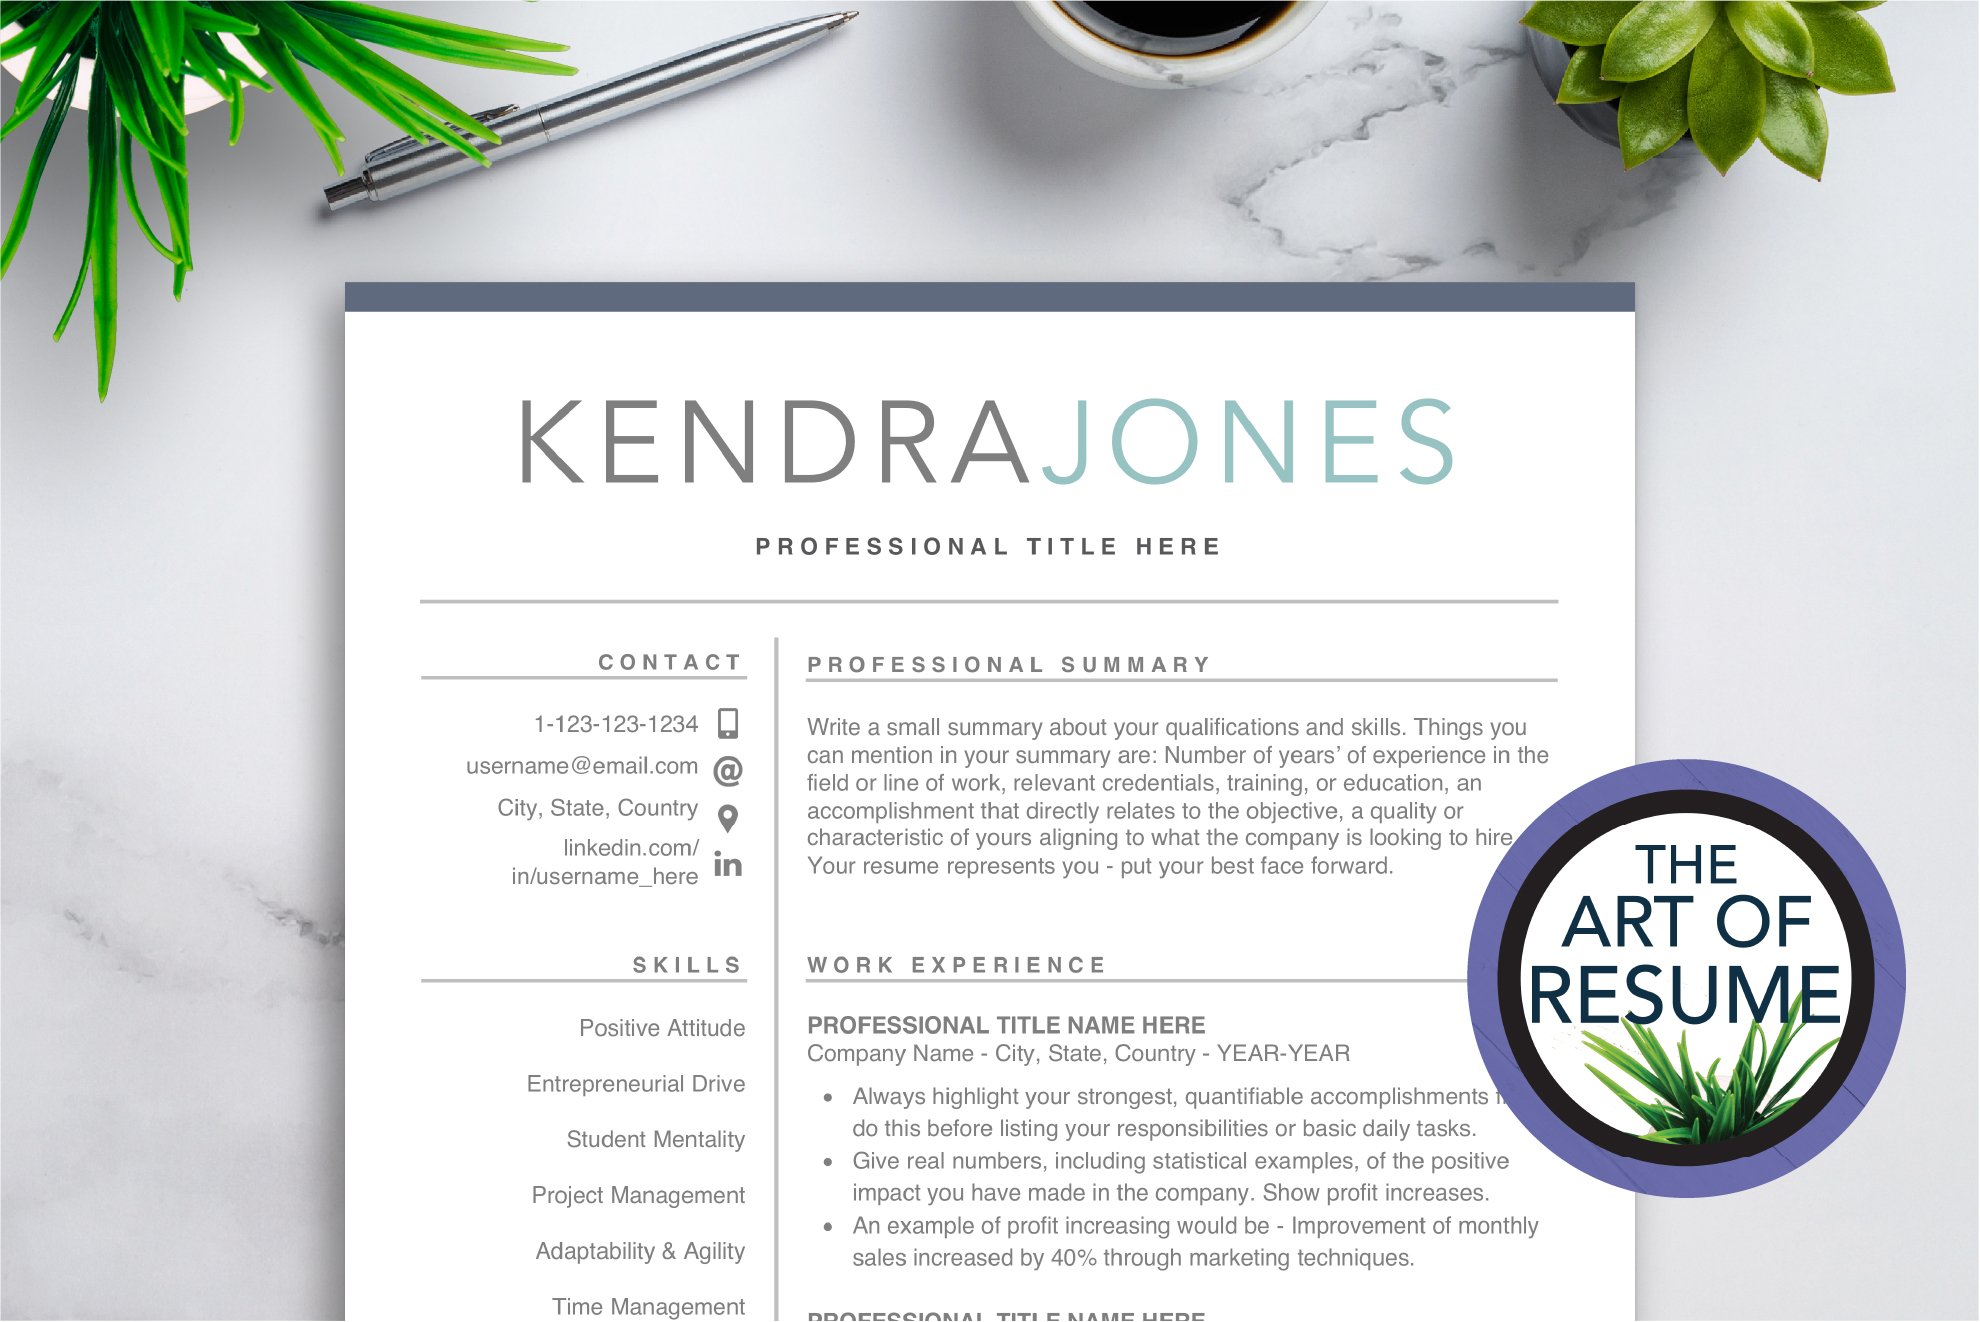 Professional Resume Template CV Word cover image.